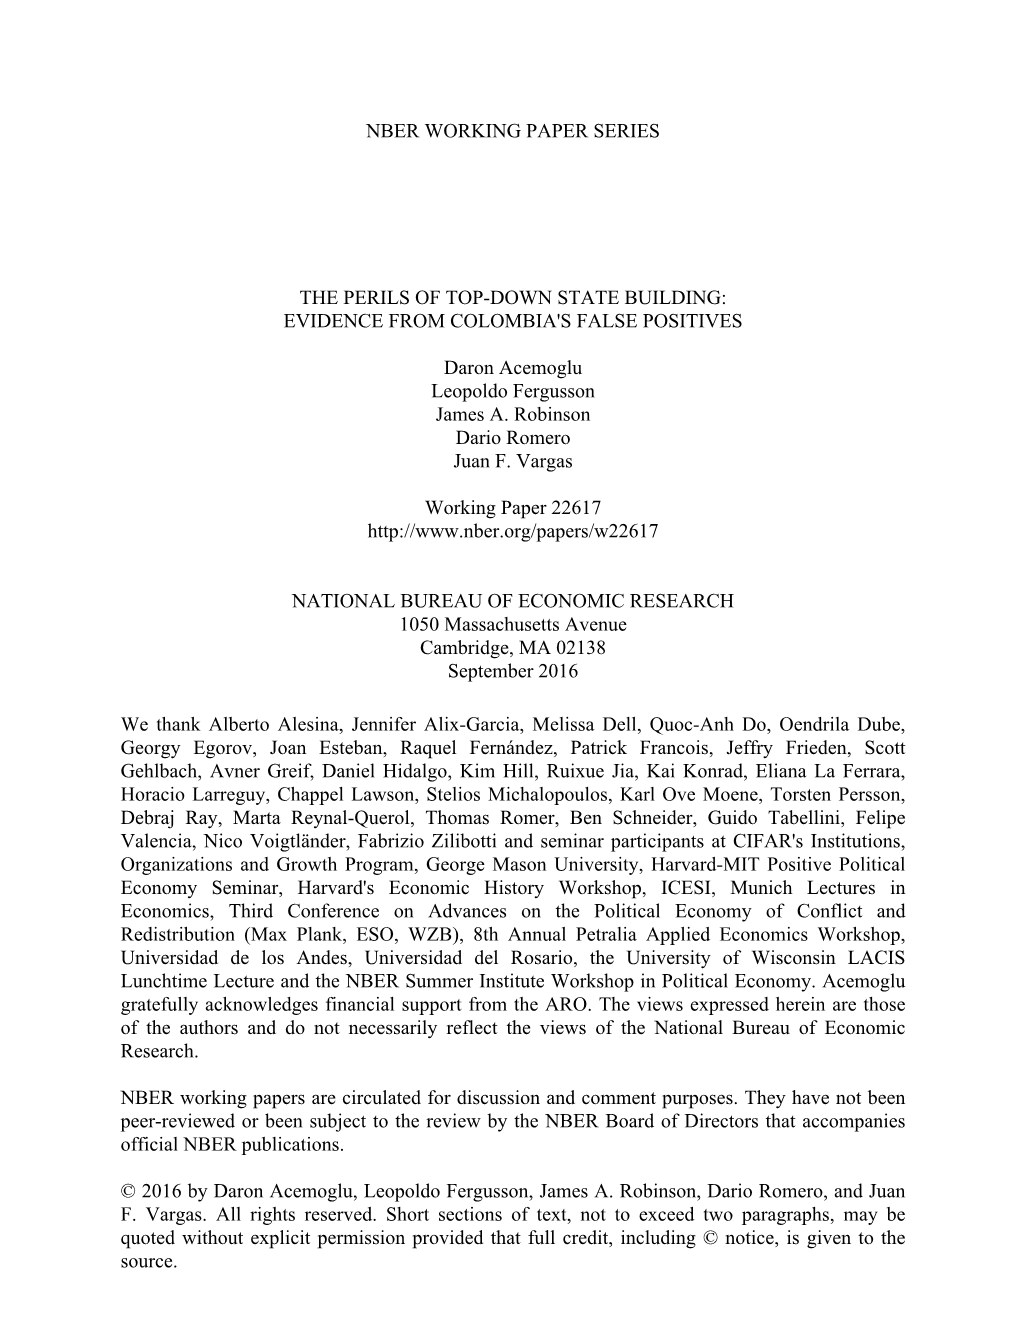 NBER WORKING PAPER SERIES the PERILS of TOP-DOWN STATE BUILDING: EVIDENCE from COLOMBIA's FALSE POSITIVES Daron Acemoglu Leopold